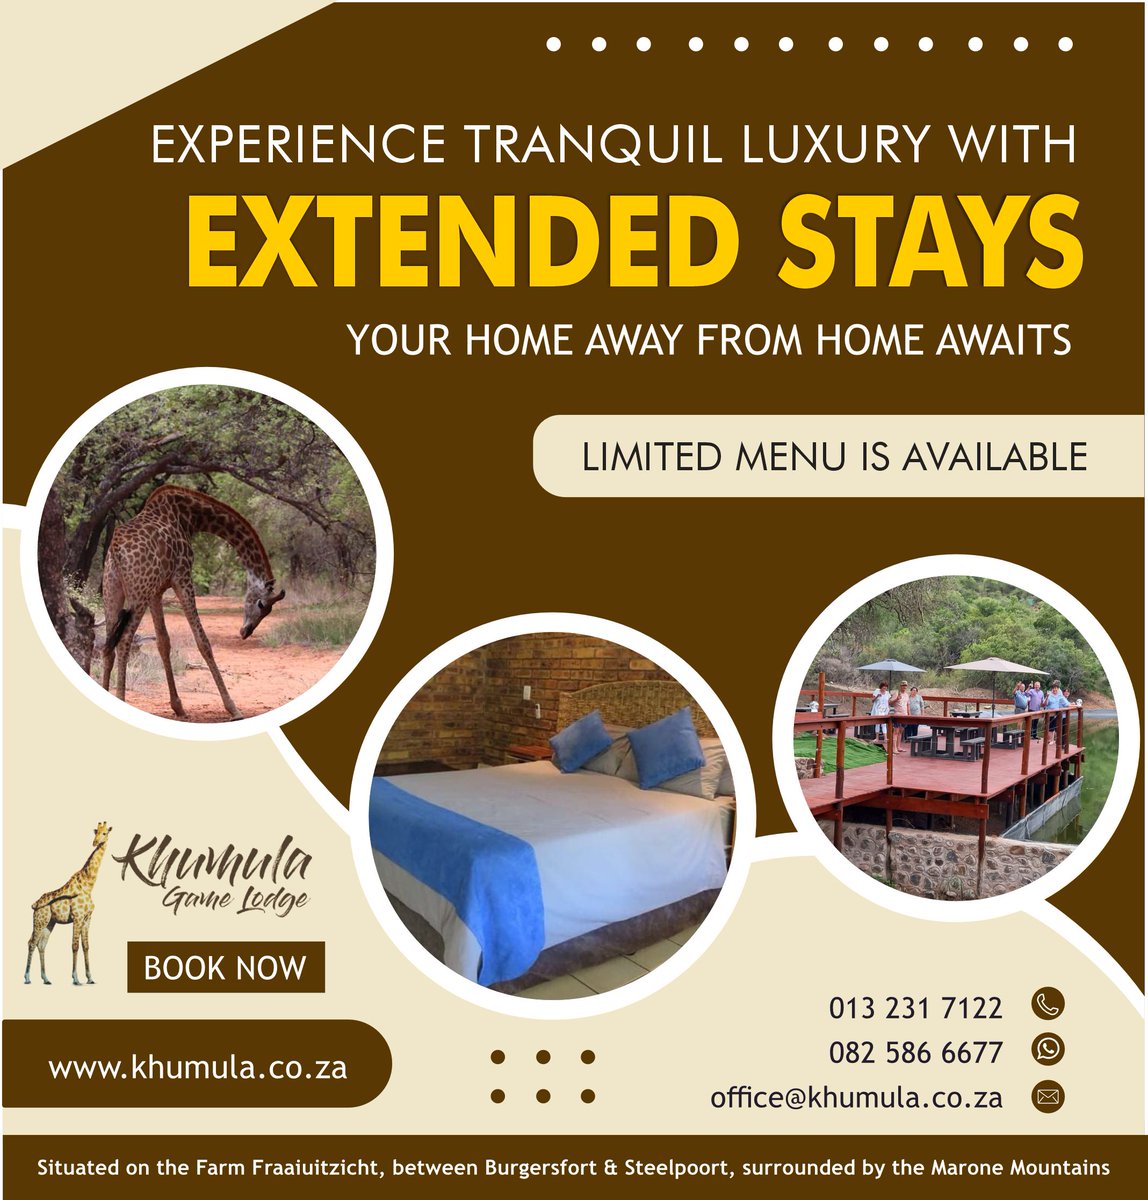 Step into a realm of comfort and convenience with our Extended Stay options at Khumula Lodge, now featuring complimentary lunch packs.

Web: khumula.co.za

#KhumulaLodge #LongTermAccommodation #LunchPacks #ComfortAndConvenience #YourHomeAwayFromHome #ExtendedStays